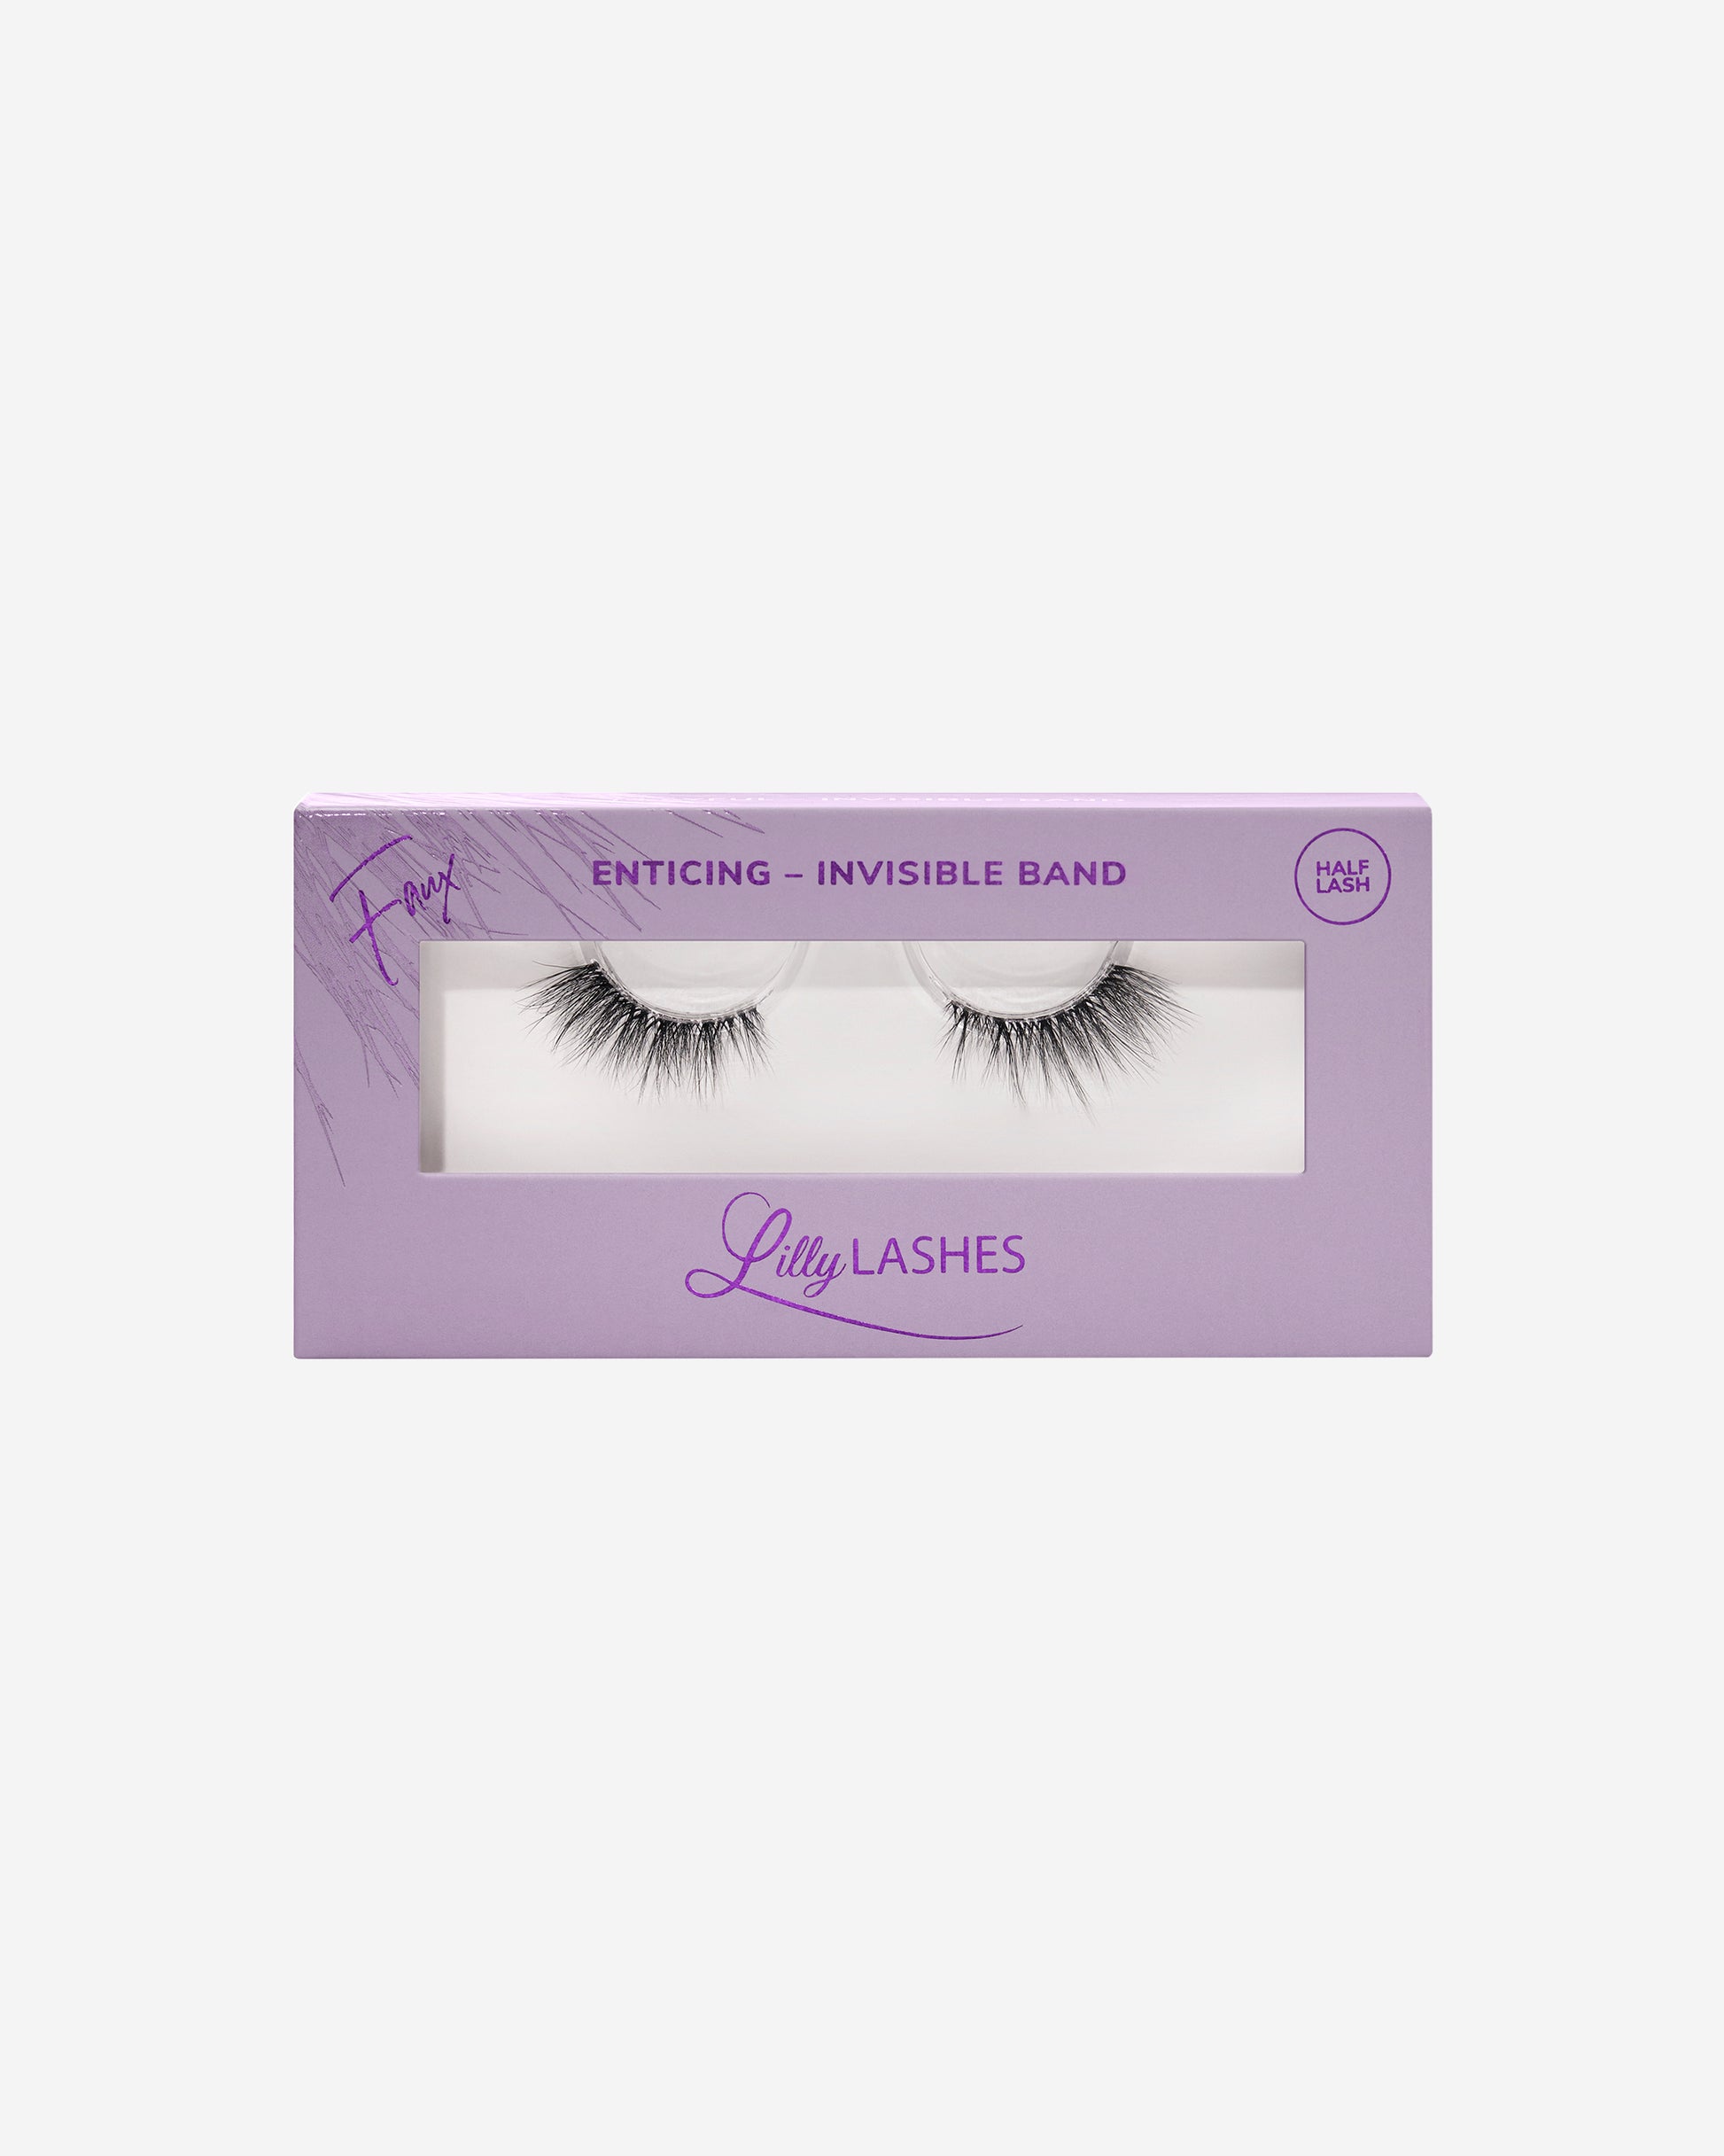 Lilly Lashes | Sheer Band | Enticing | Front of Box